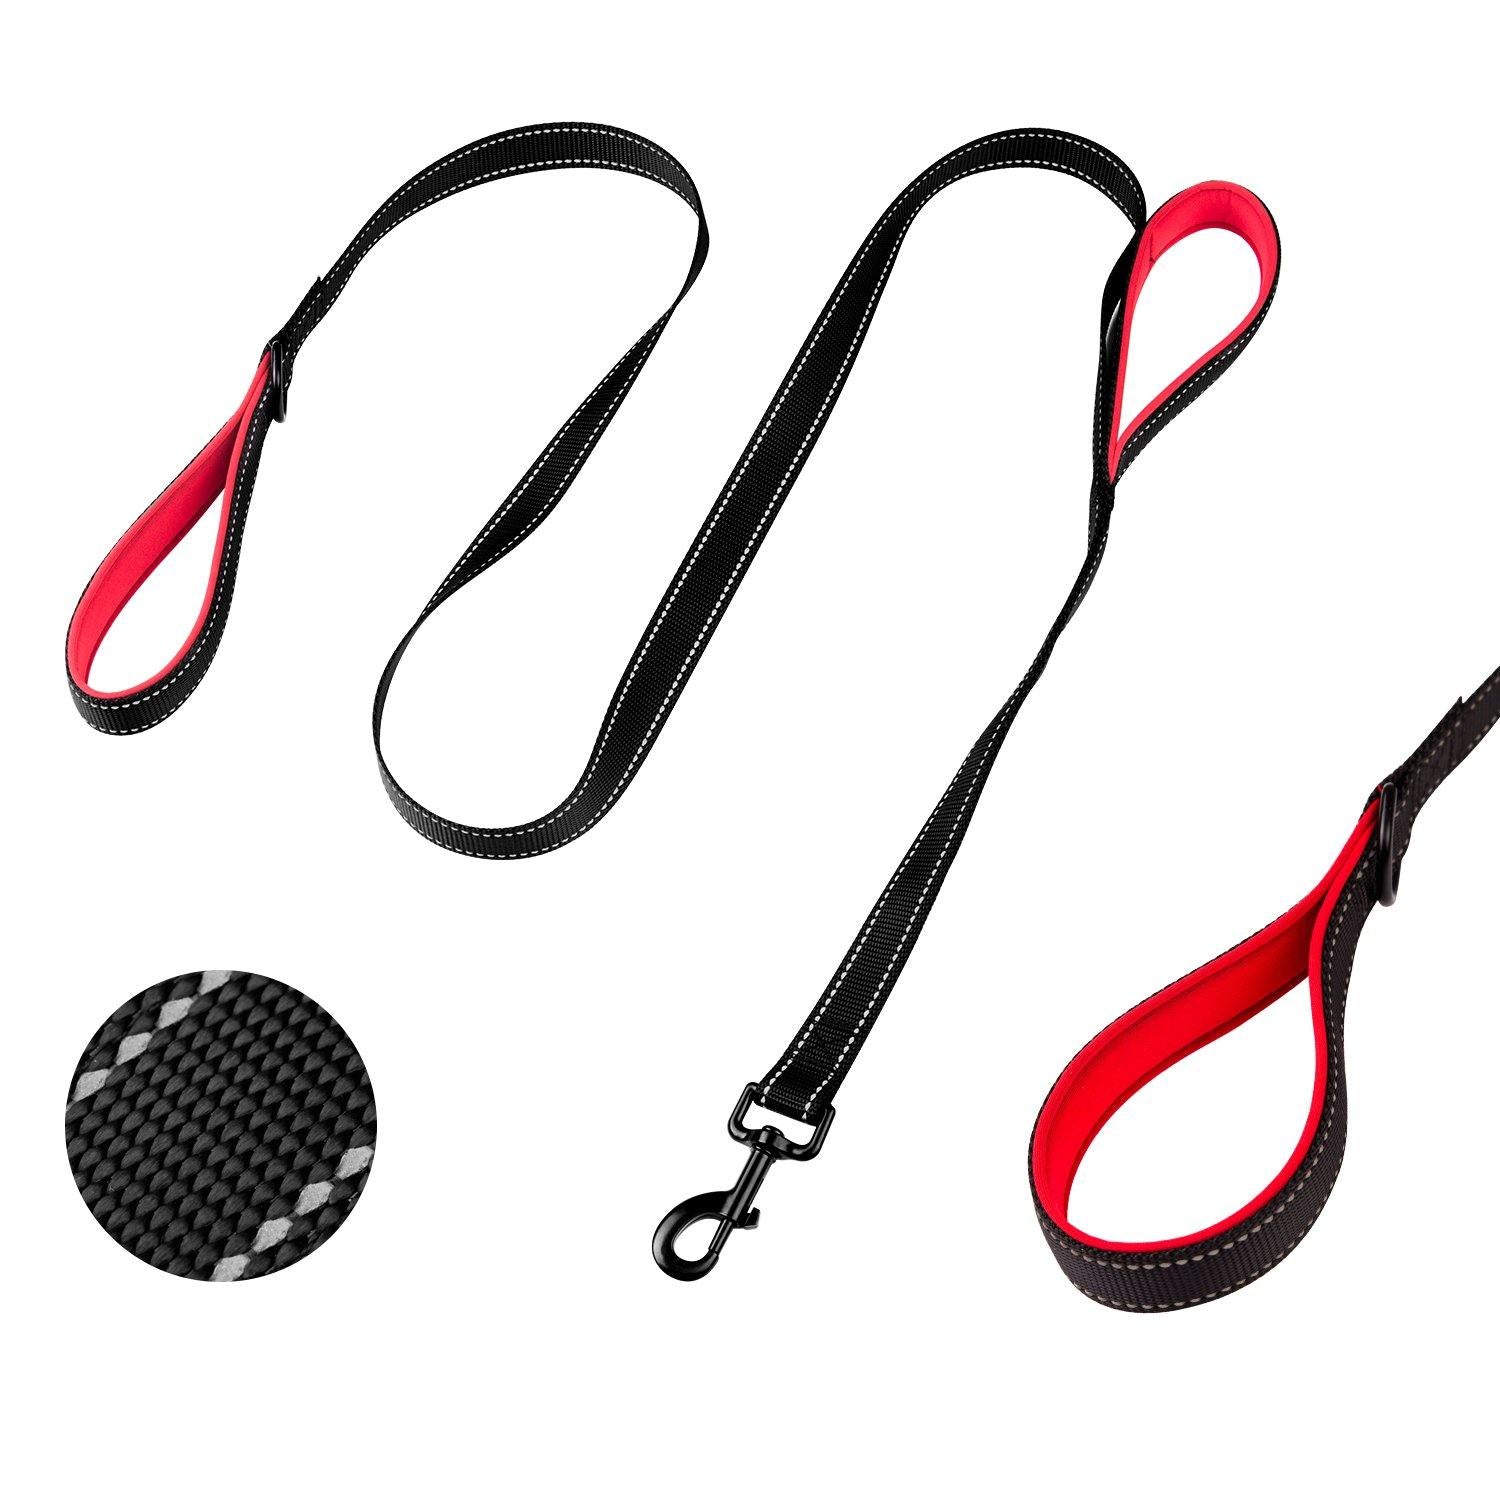 Dog Leash 6ft Adjustable Cord for Walking Traffic Padded Two Handle Retractable - Silipac